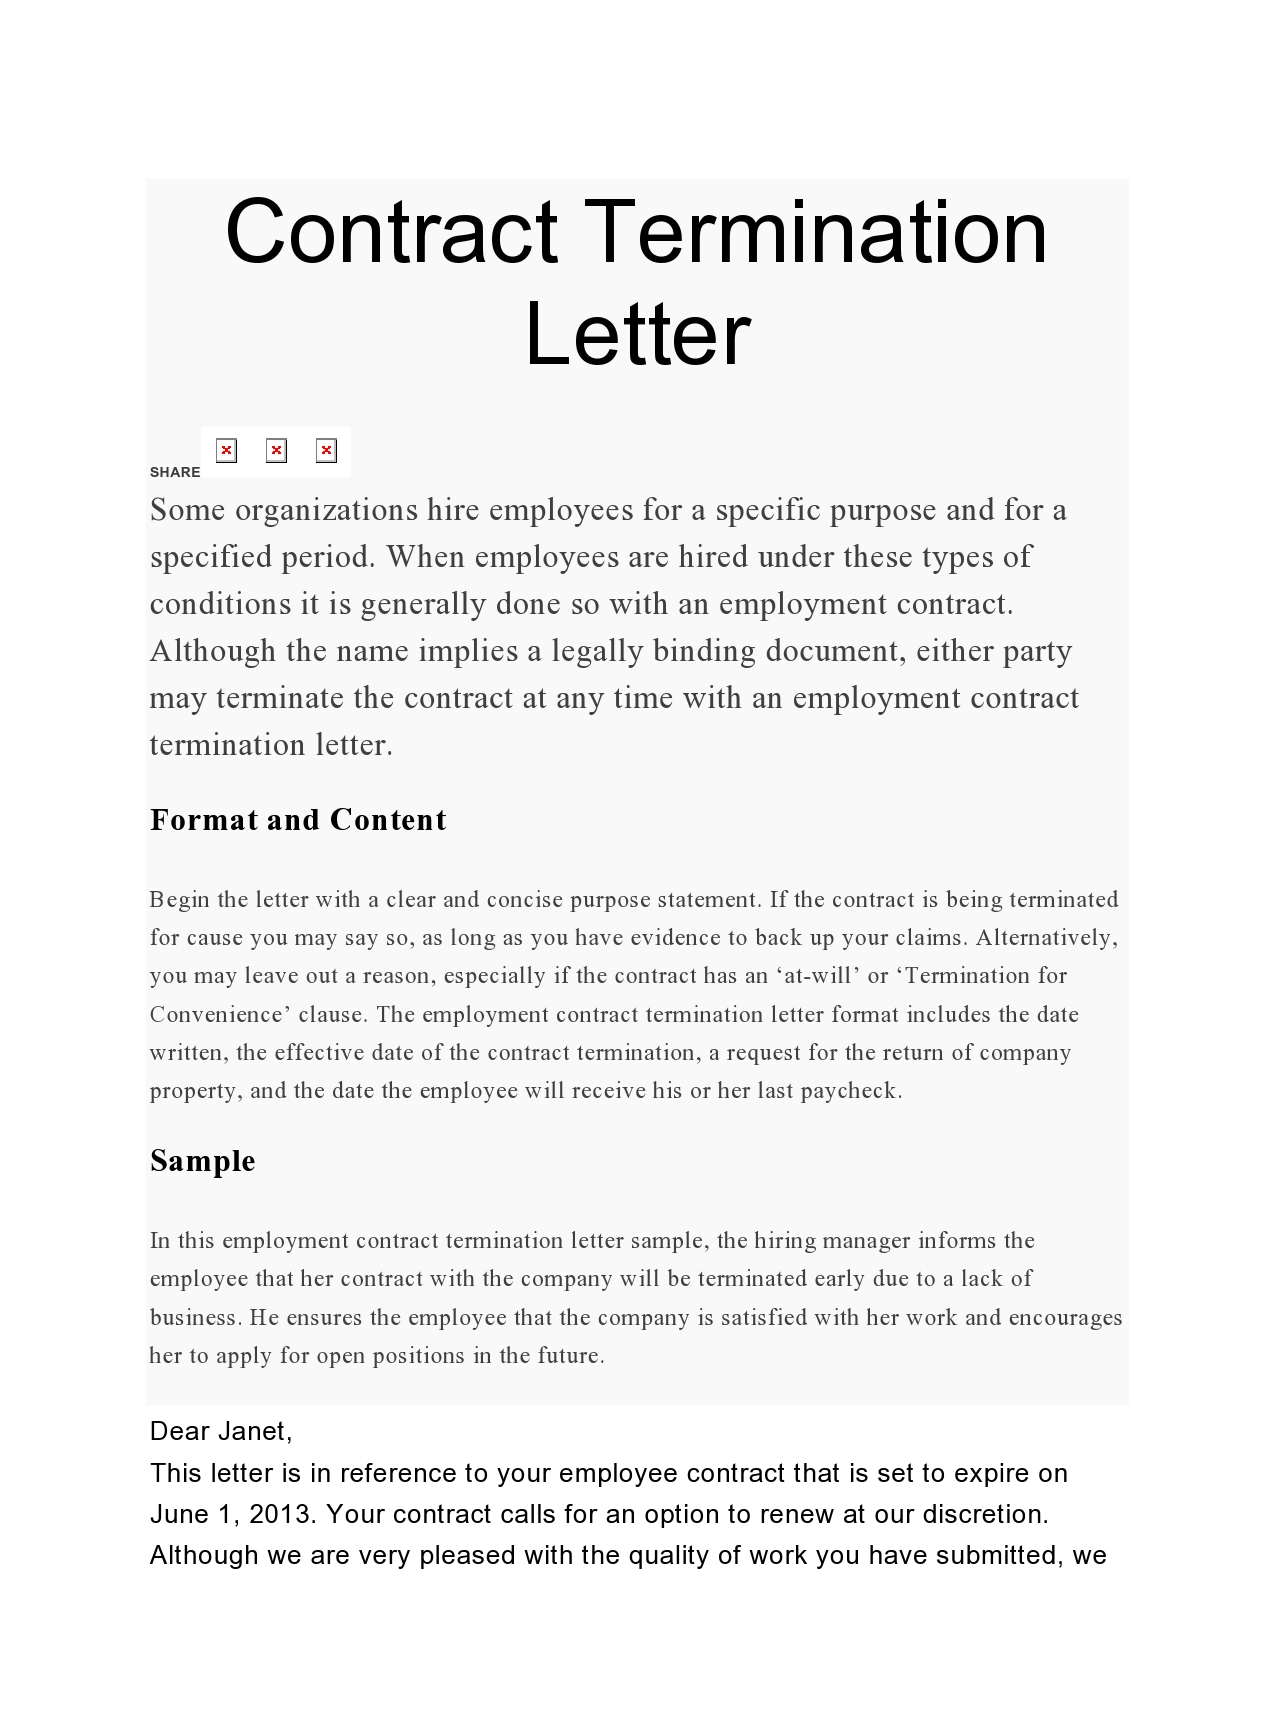 Free contract termination letter 37